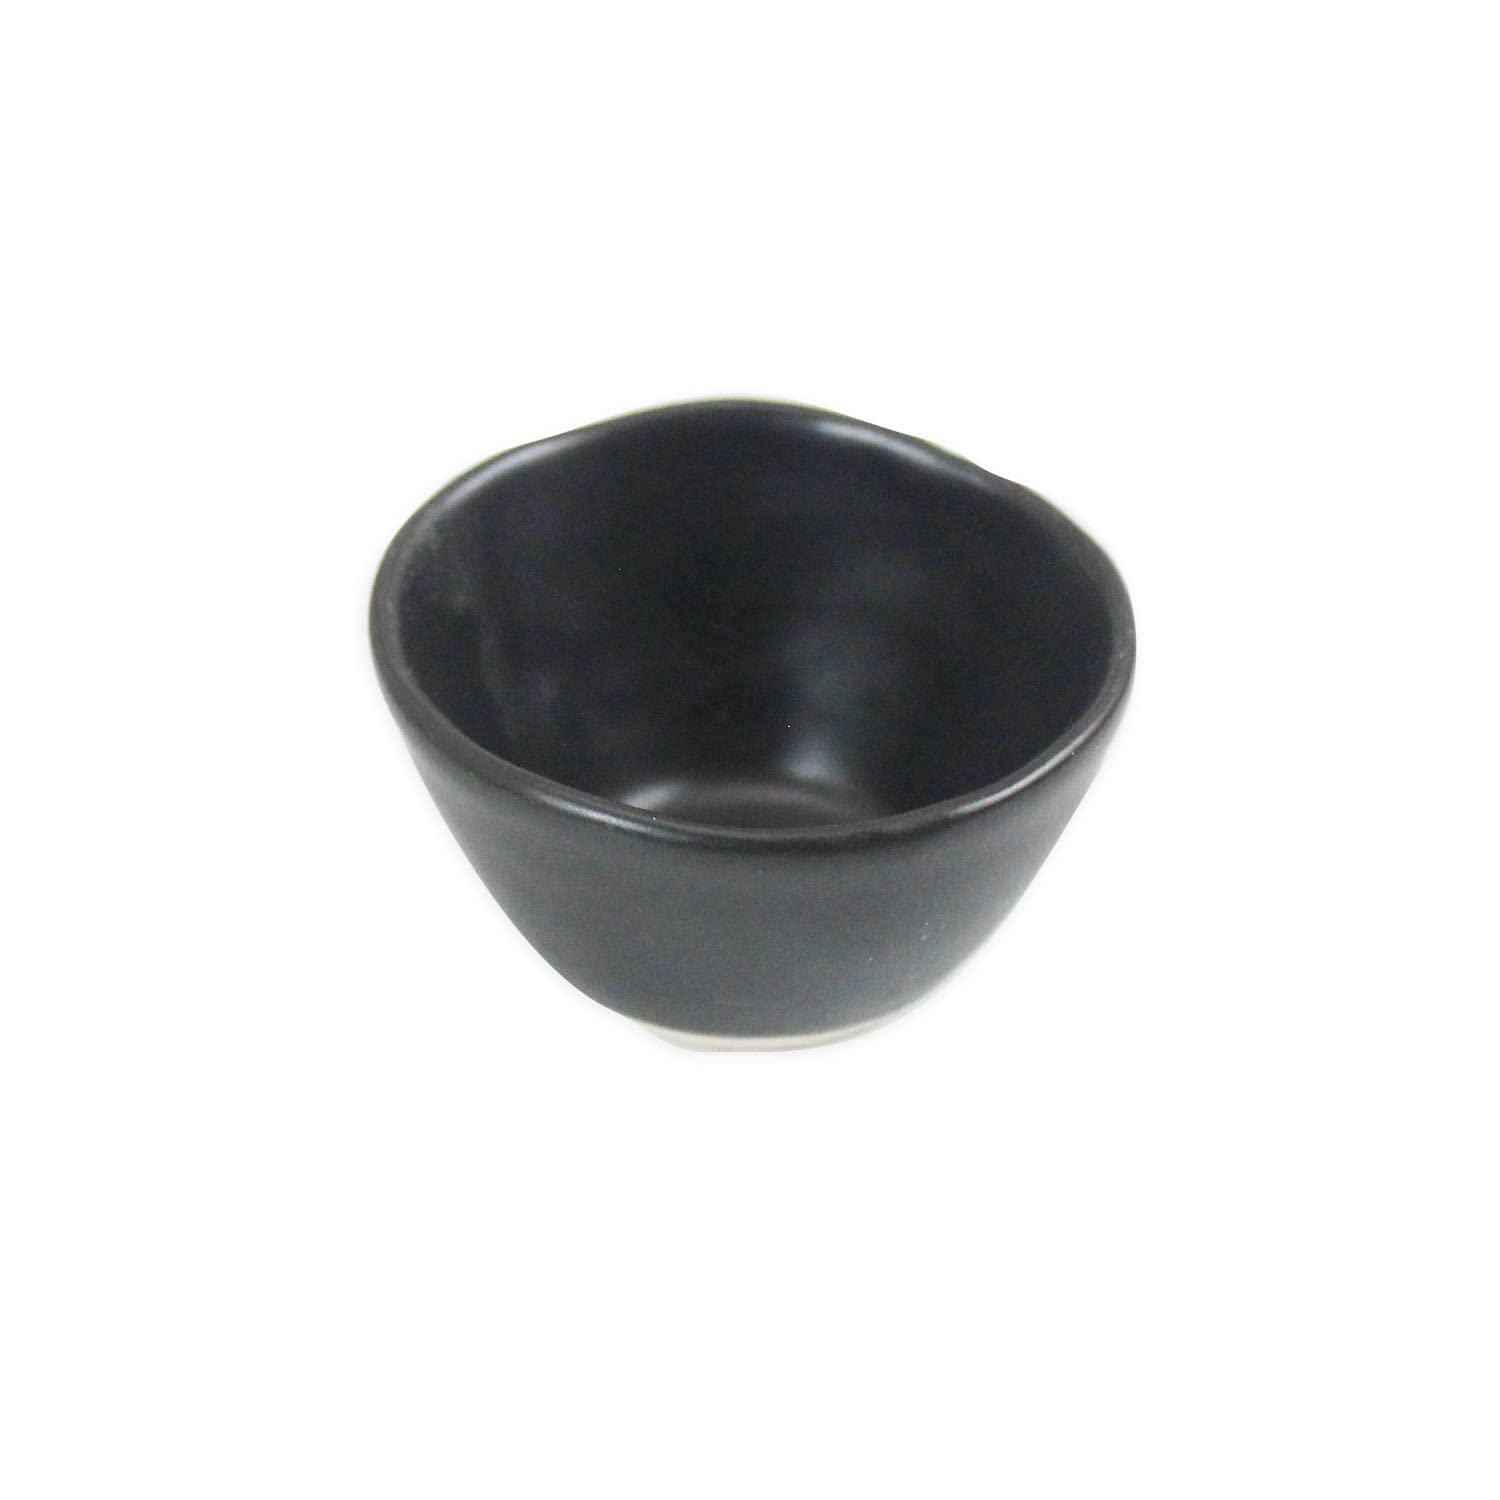 roro Handmade Matte Black Ceramic Conical Sauce Bowls - 3 Ounce, Set of 4, Elegant Artisan Crafted Dishes for Dips, Spices, and Condiments, Lead-Free and Cadmium-Free